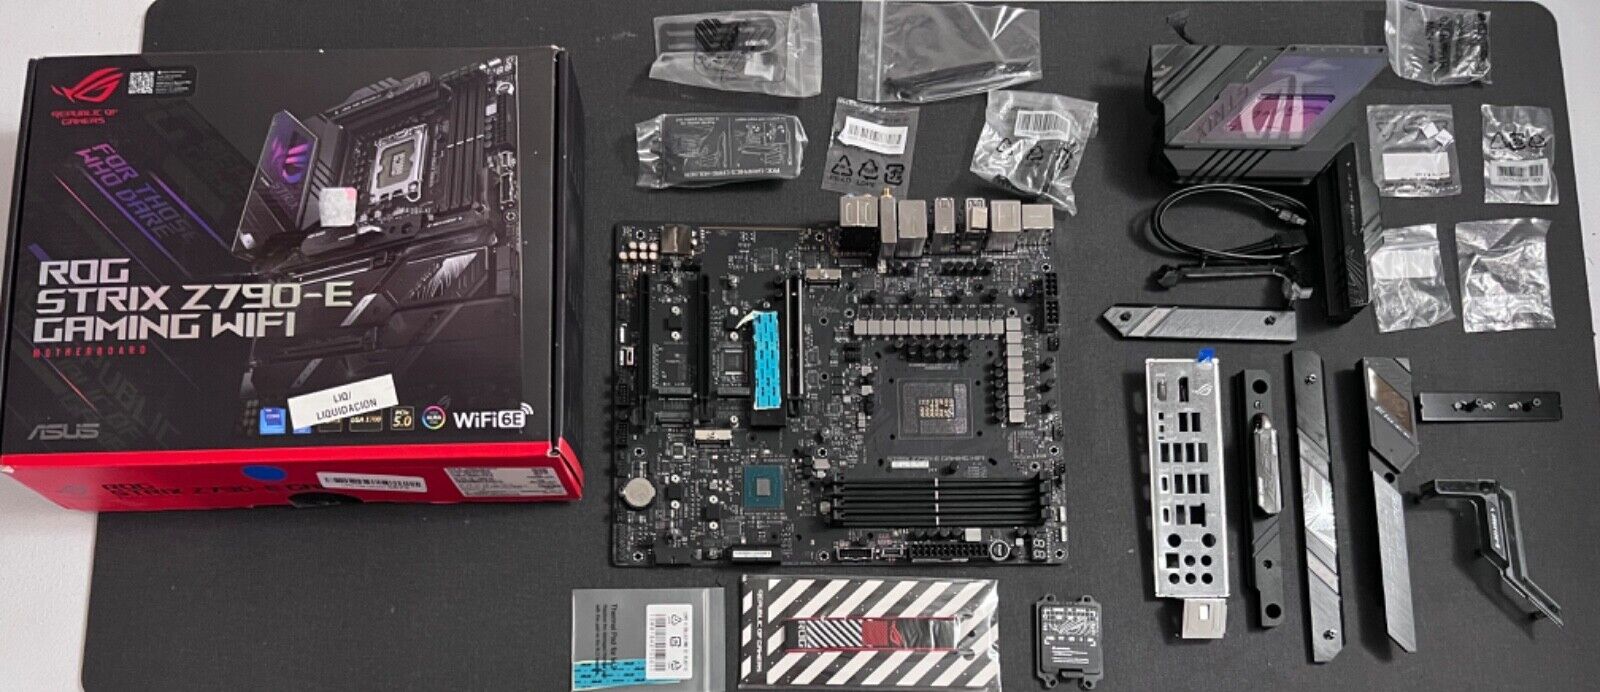 As-is Untested ASUS - ROG STRIX Z790-E GAMING WIFI Motherboard